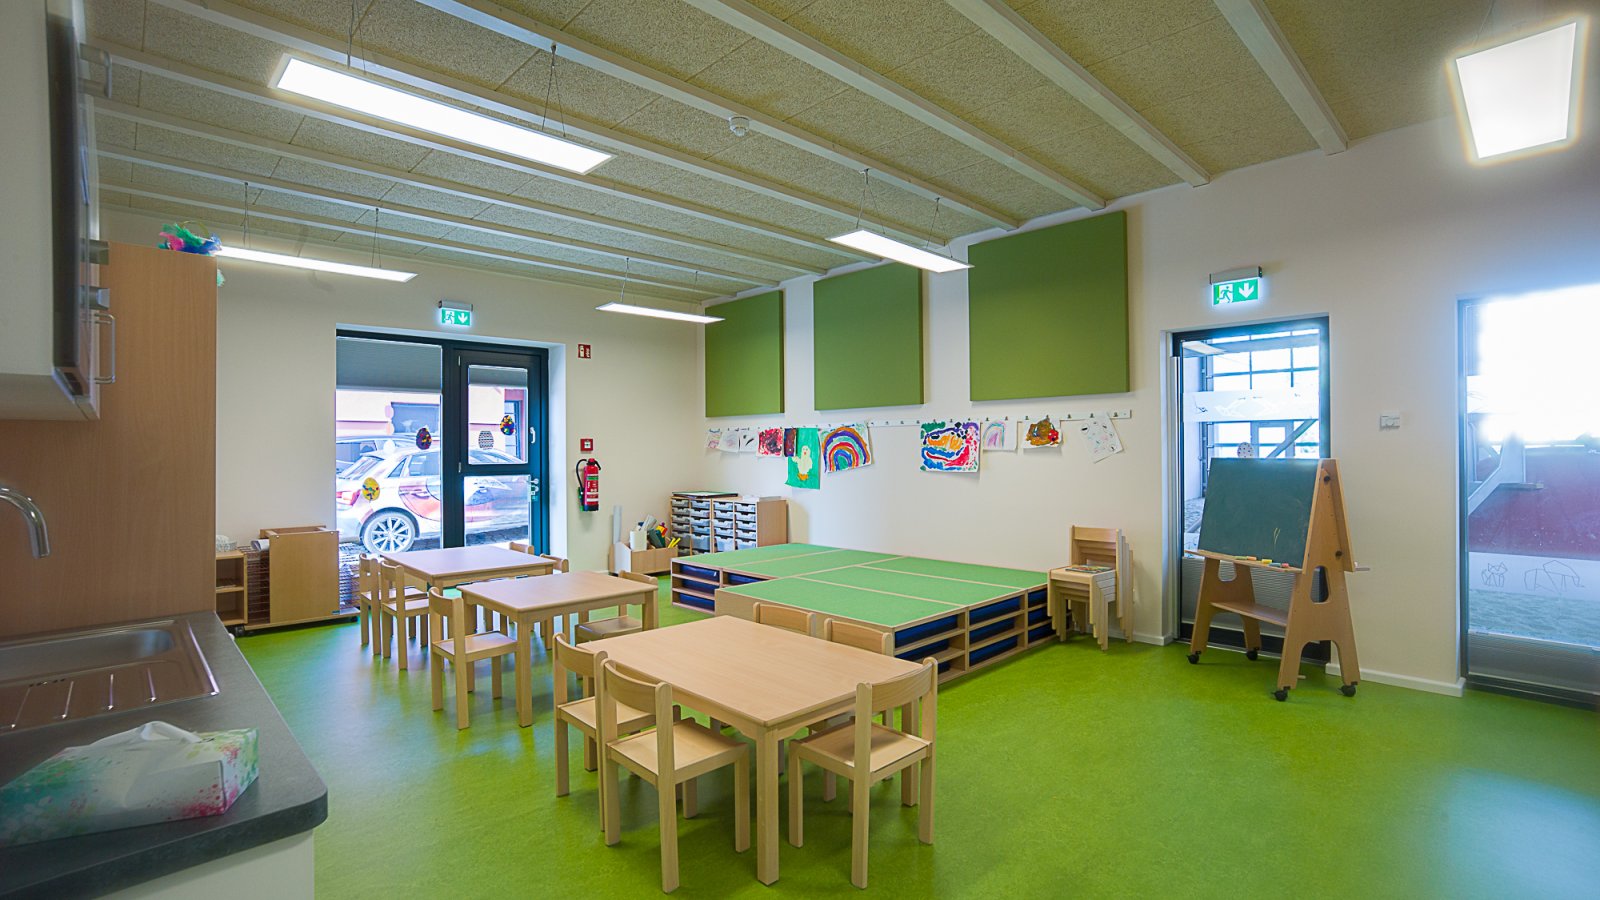 Group room of a day care centre with green floor and wooden tables and chairs